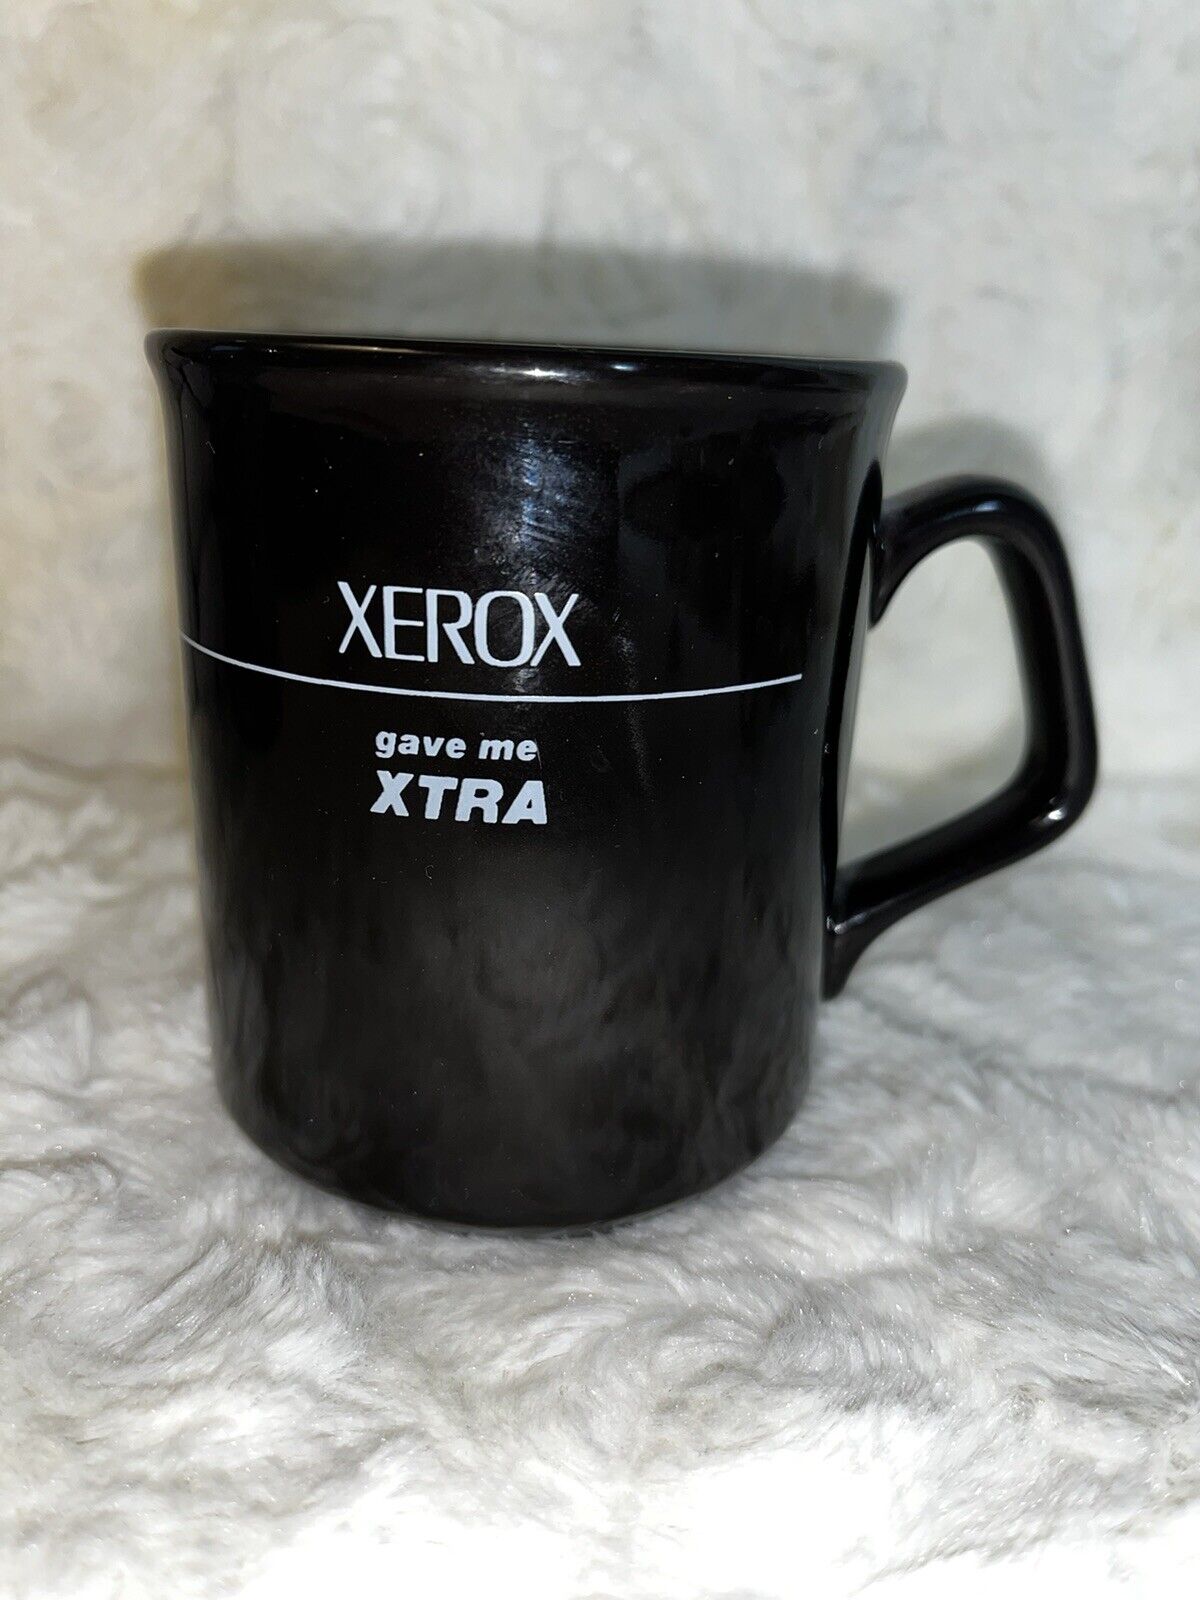 VTG “Xerox Gave Me Xtra” Coffee Mug Cup Made in England Black Unique Handle Nice